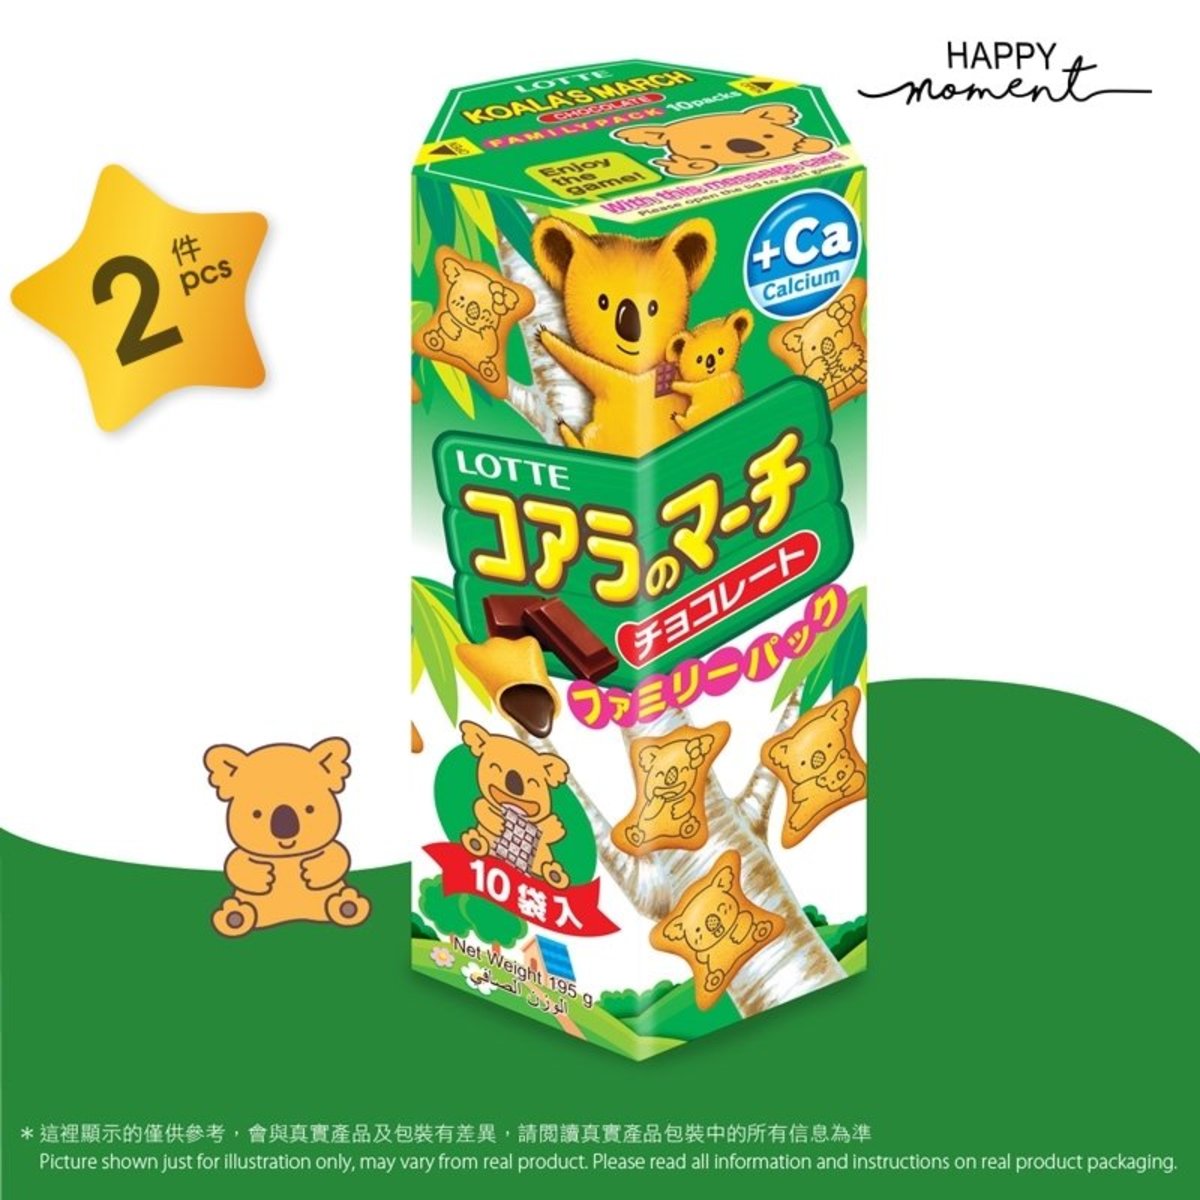 2pcs - LOTTE Koala\\\'s March Chocolate Biscuits (Family Pack) 樂天 熊仔餅 - 朱古力味 (家庭裝) (195g x2)